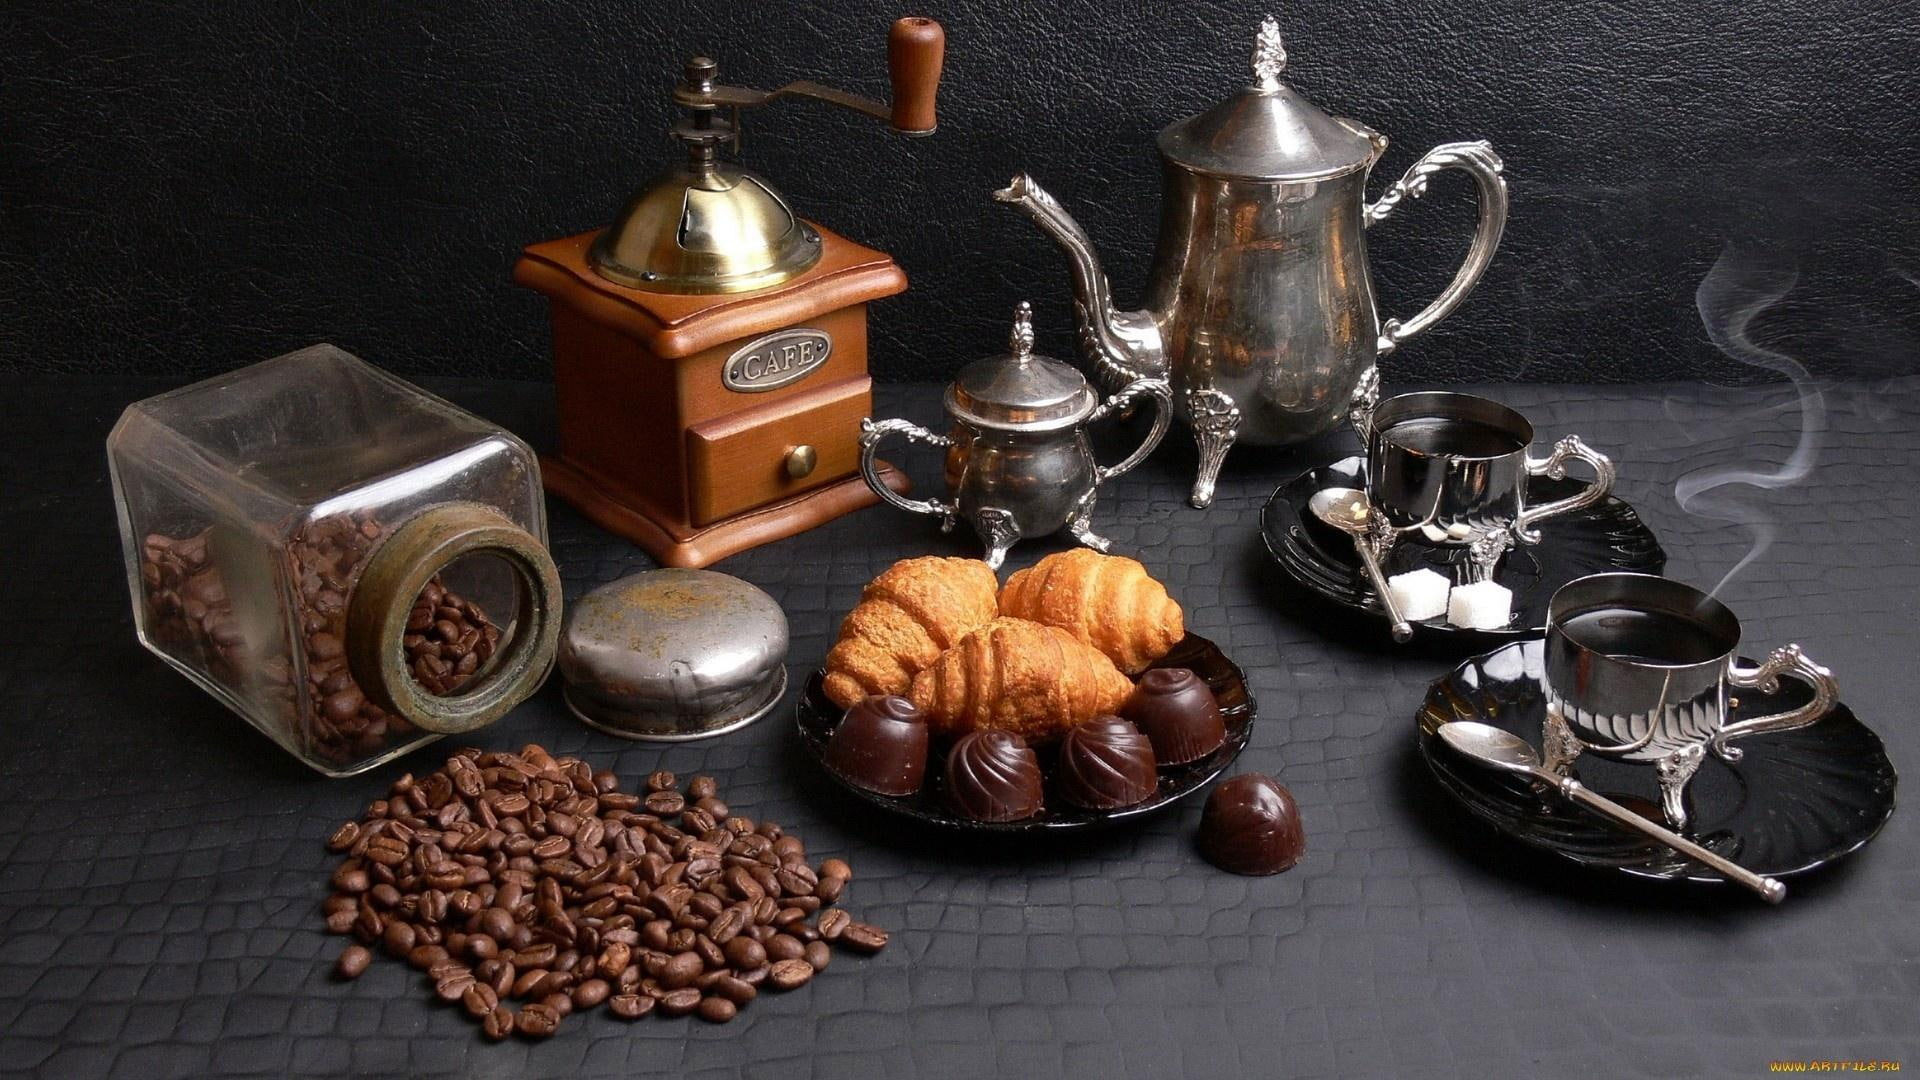 Coffee wallpaper, stainless steel tea set, coffee grinder, and coffee beans